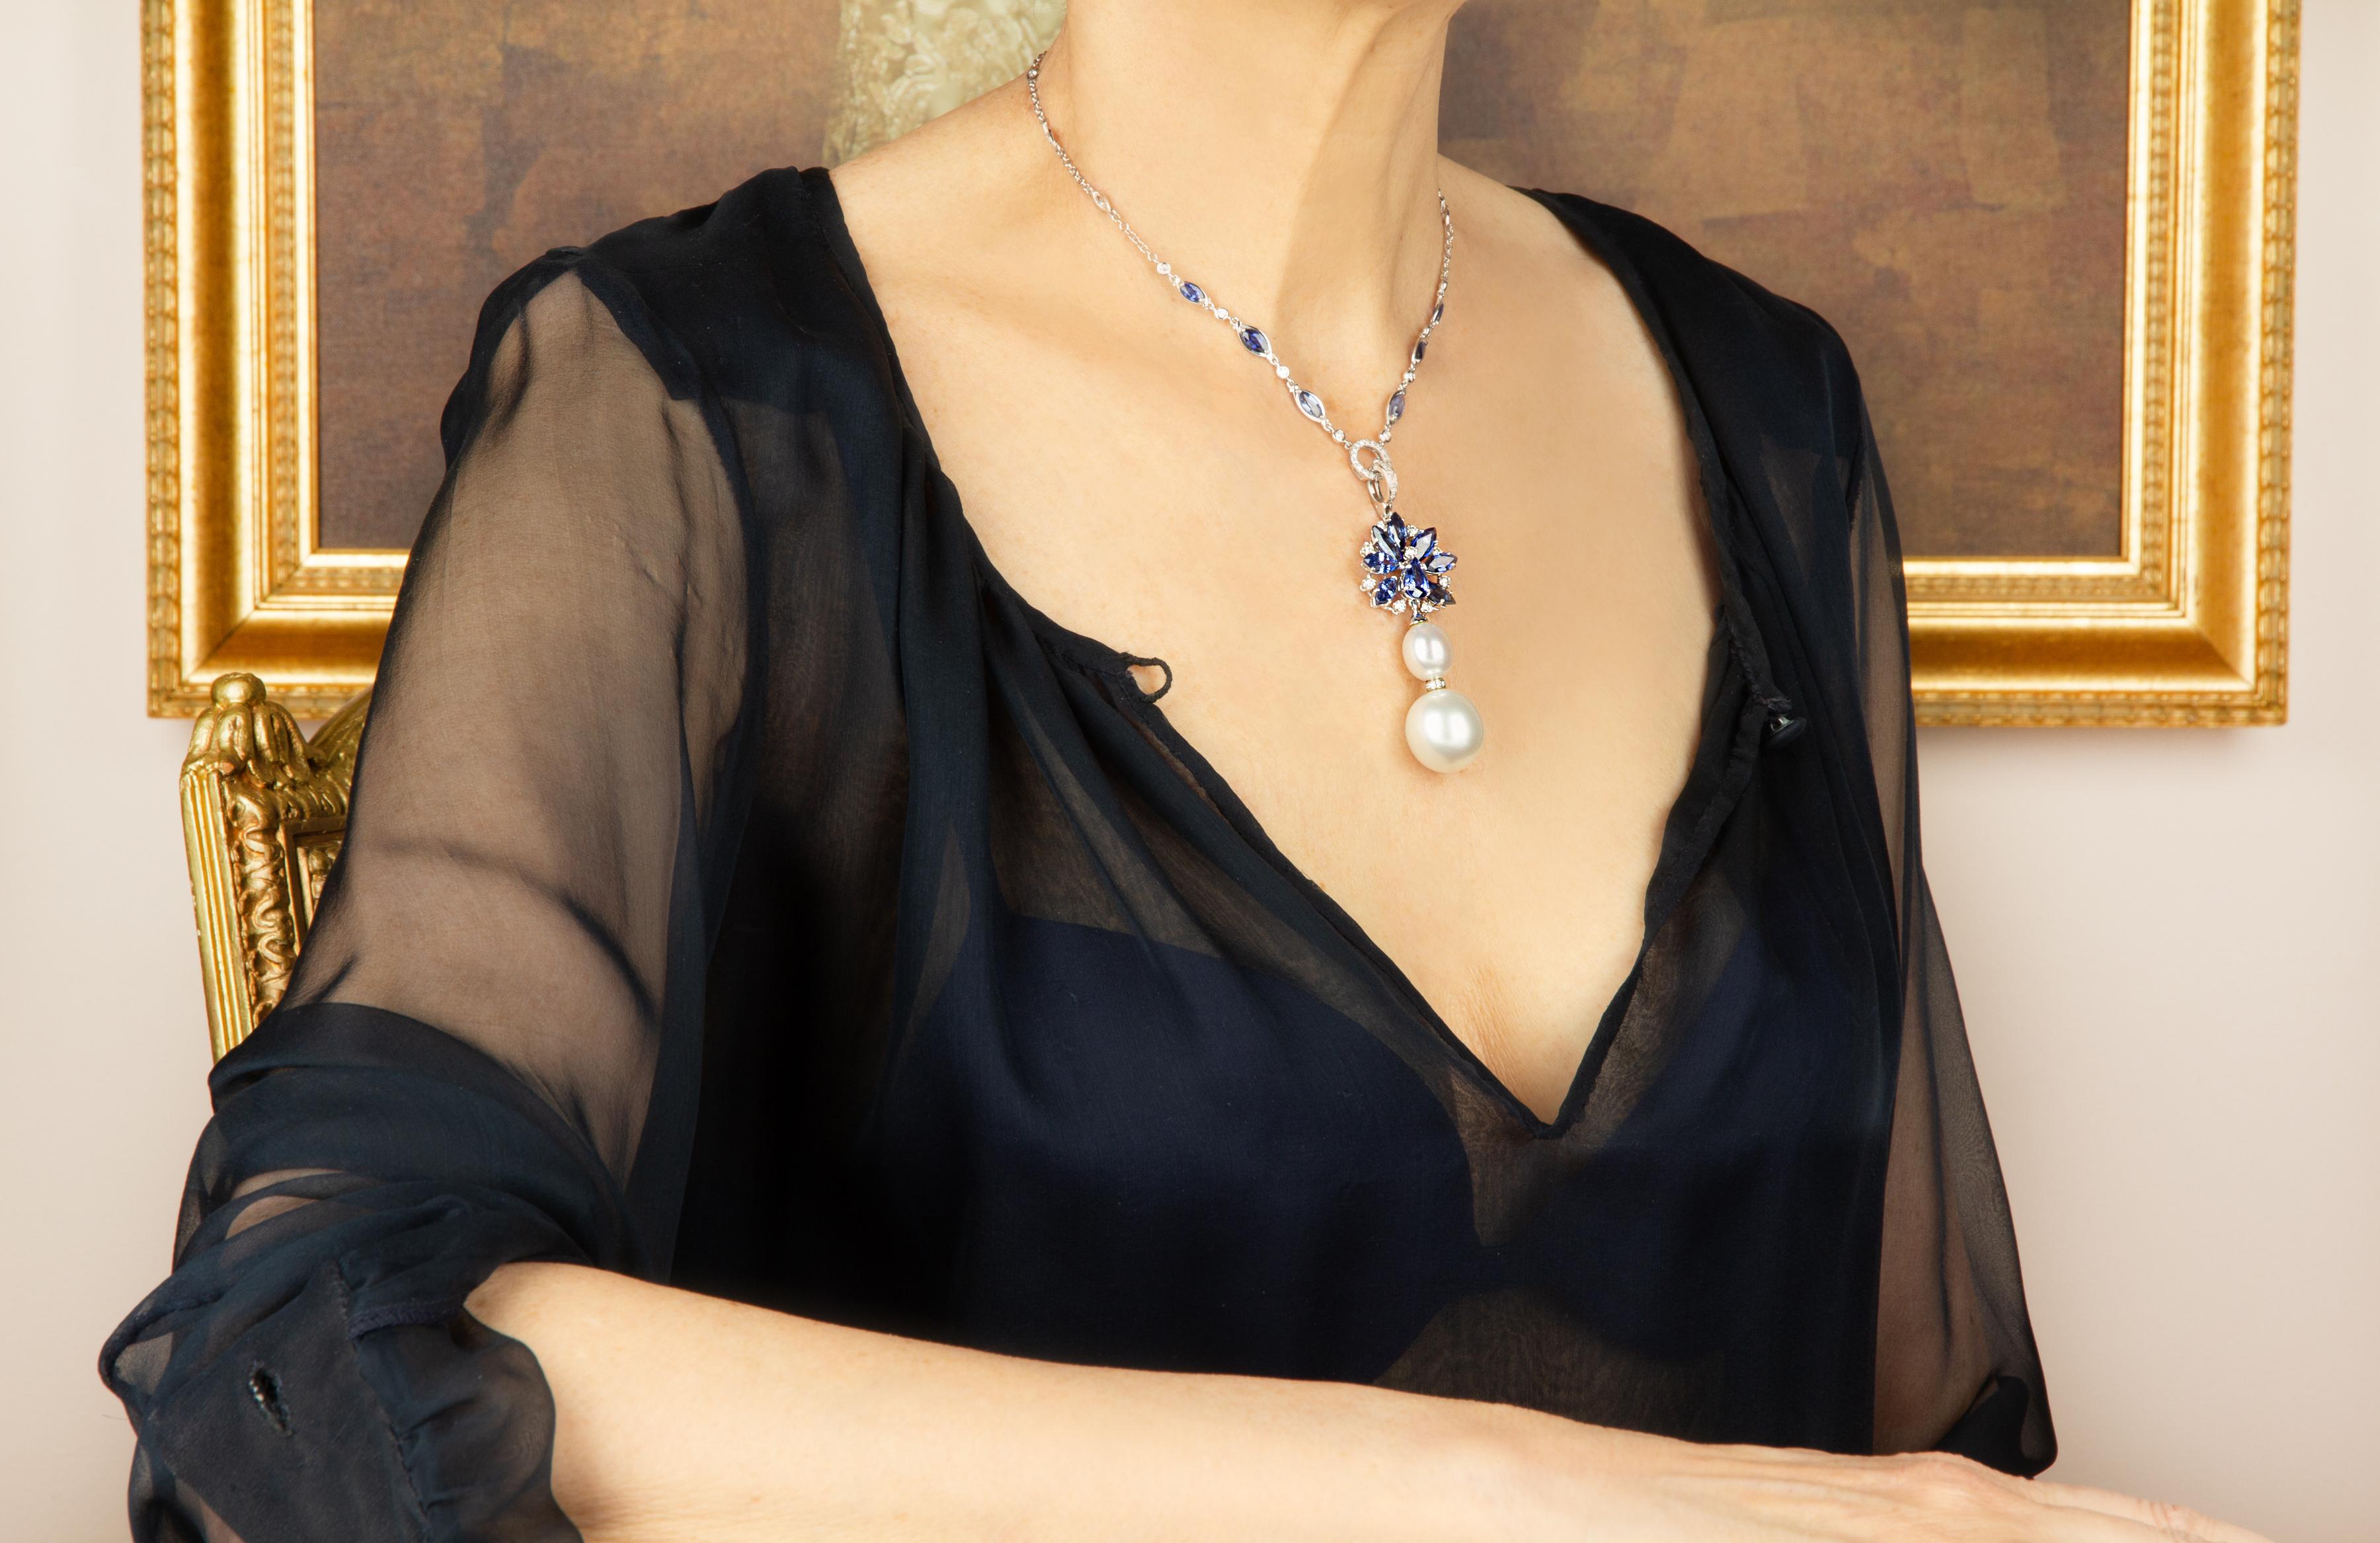 The blue sapphire pendant features a spray of marquise shape faceted Ceylon sapphires spangled with a crown of round diamonds. The jewel suspends 2 splendid South Sea pearls, the larger one being of the very rare size of 19 x 17.5mm. The 2.75”